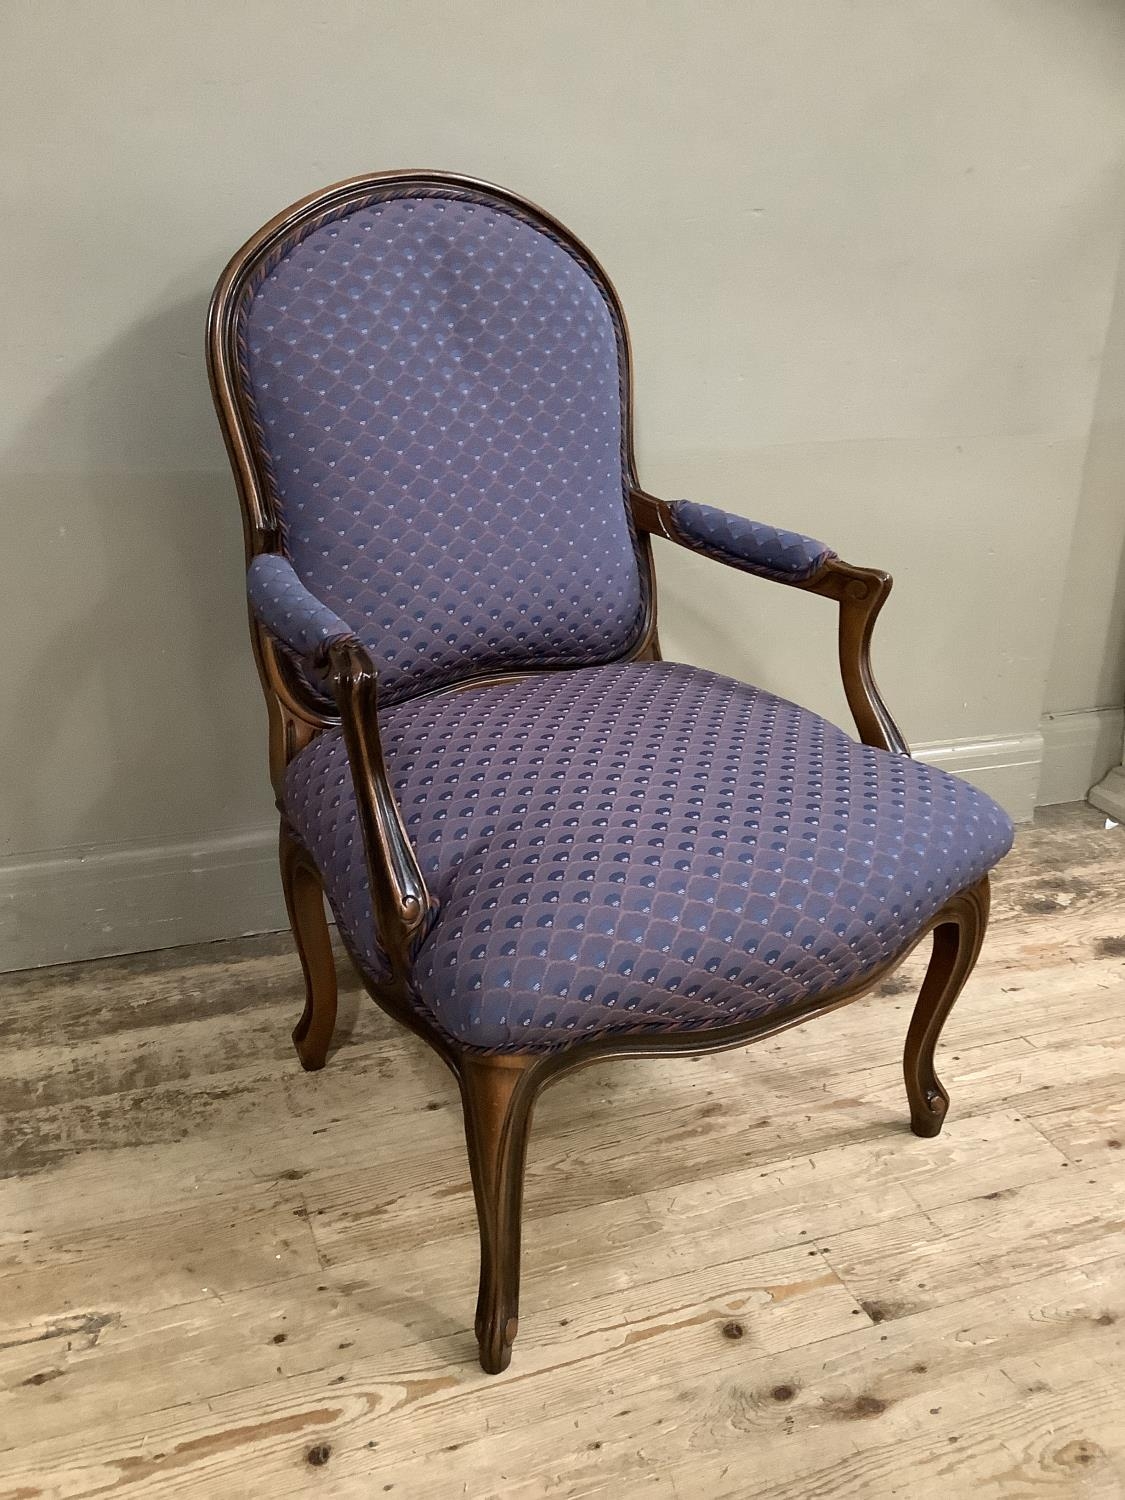 A reproduction French style open armchair on cabriole legs, upholstered in blue and orange scalloped